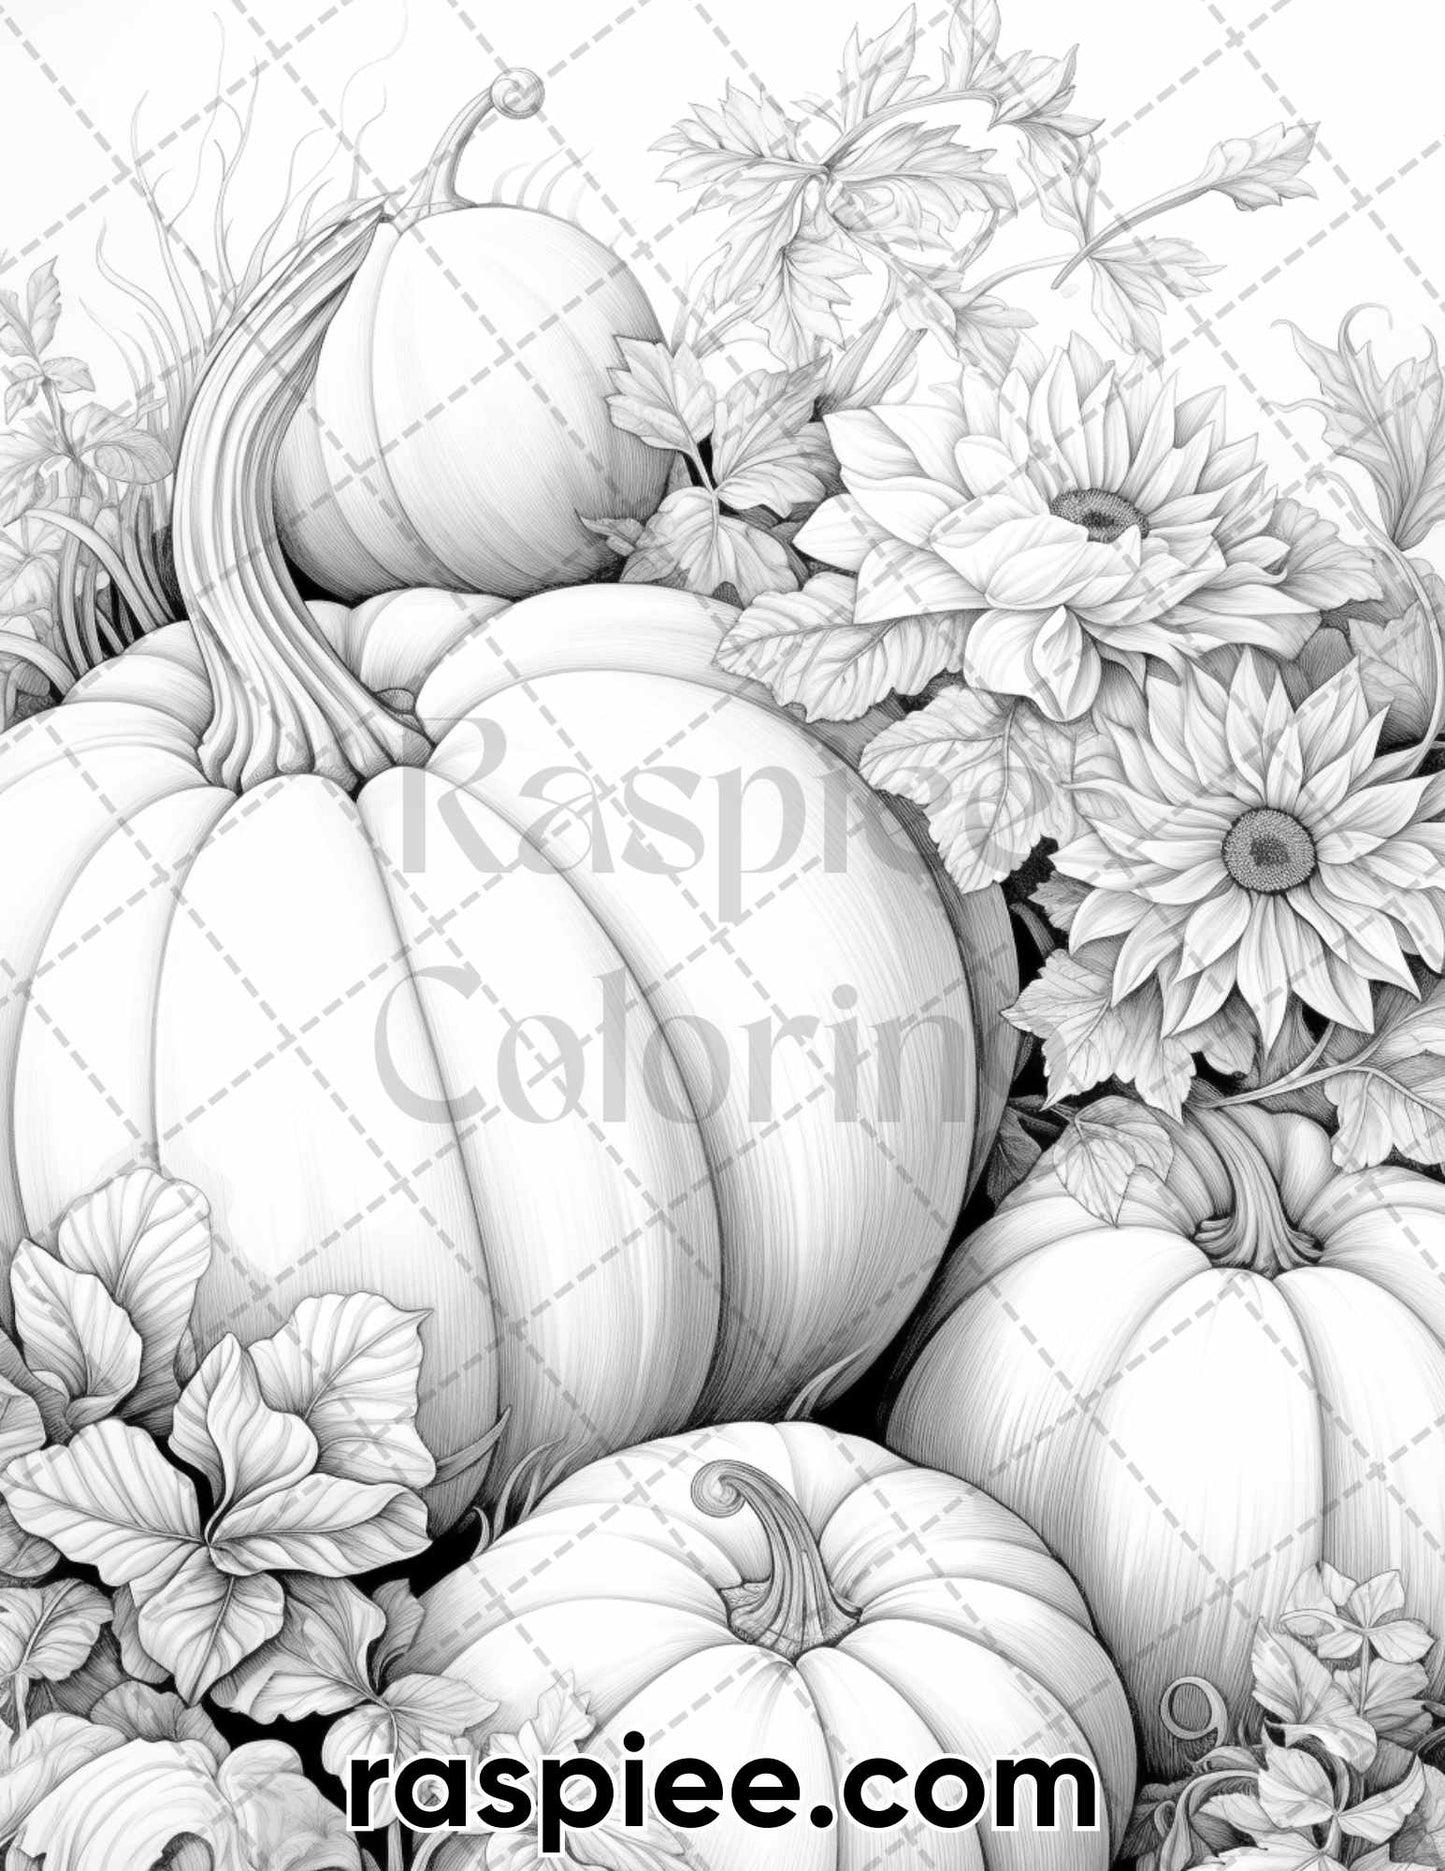 Adult coloring printable sheets, Happy Thanksgiving coloring pages, thanksgiving coloring book printable, holiday coloring pages, autumn coloring pages, fall coloring pages, autumn coloring sheets, thanksgiving coloring sheets